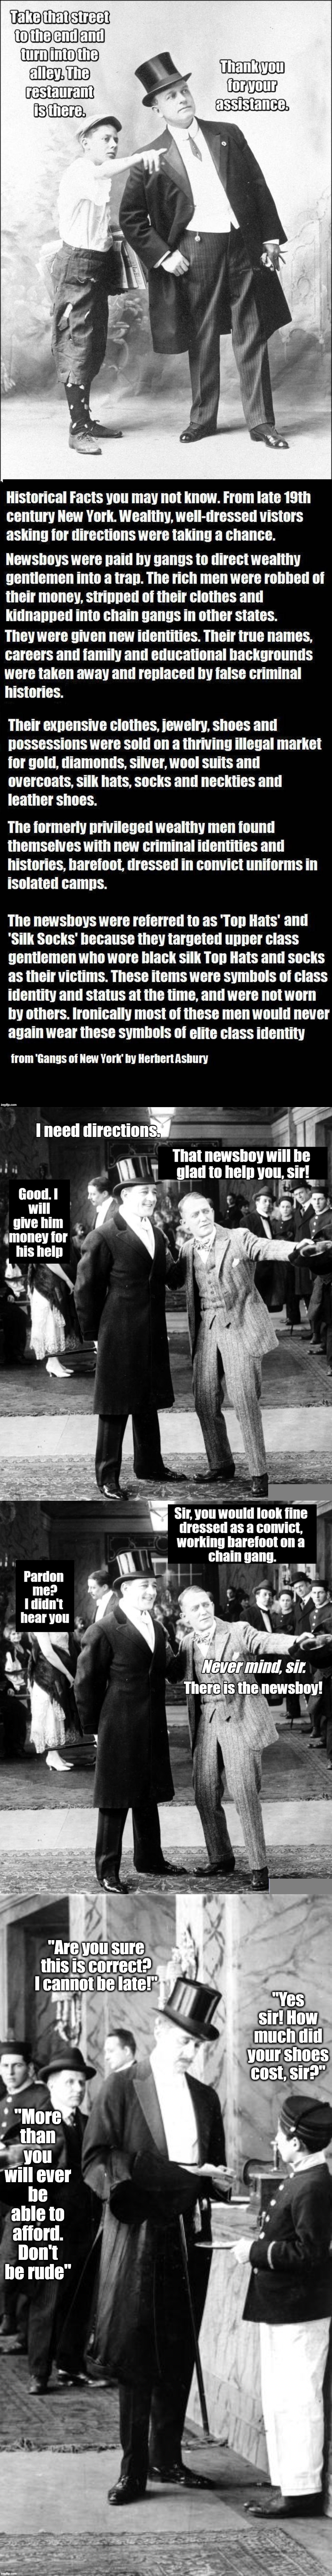 History You Might Not Know.The Perils of Asking for Directions in Old New York | image tagged in history,interesting | made w/ Imgflip meme maker